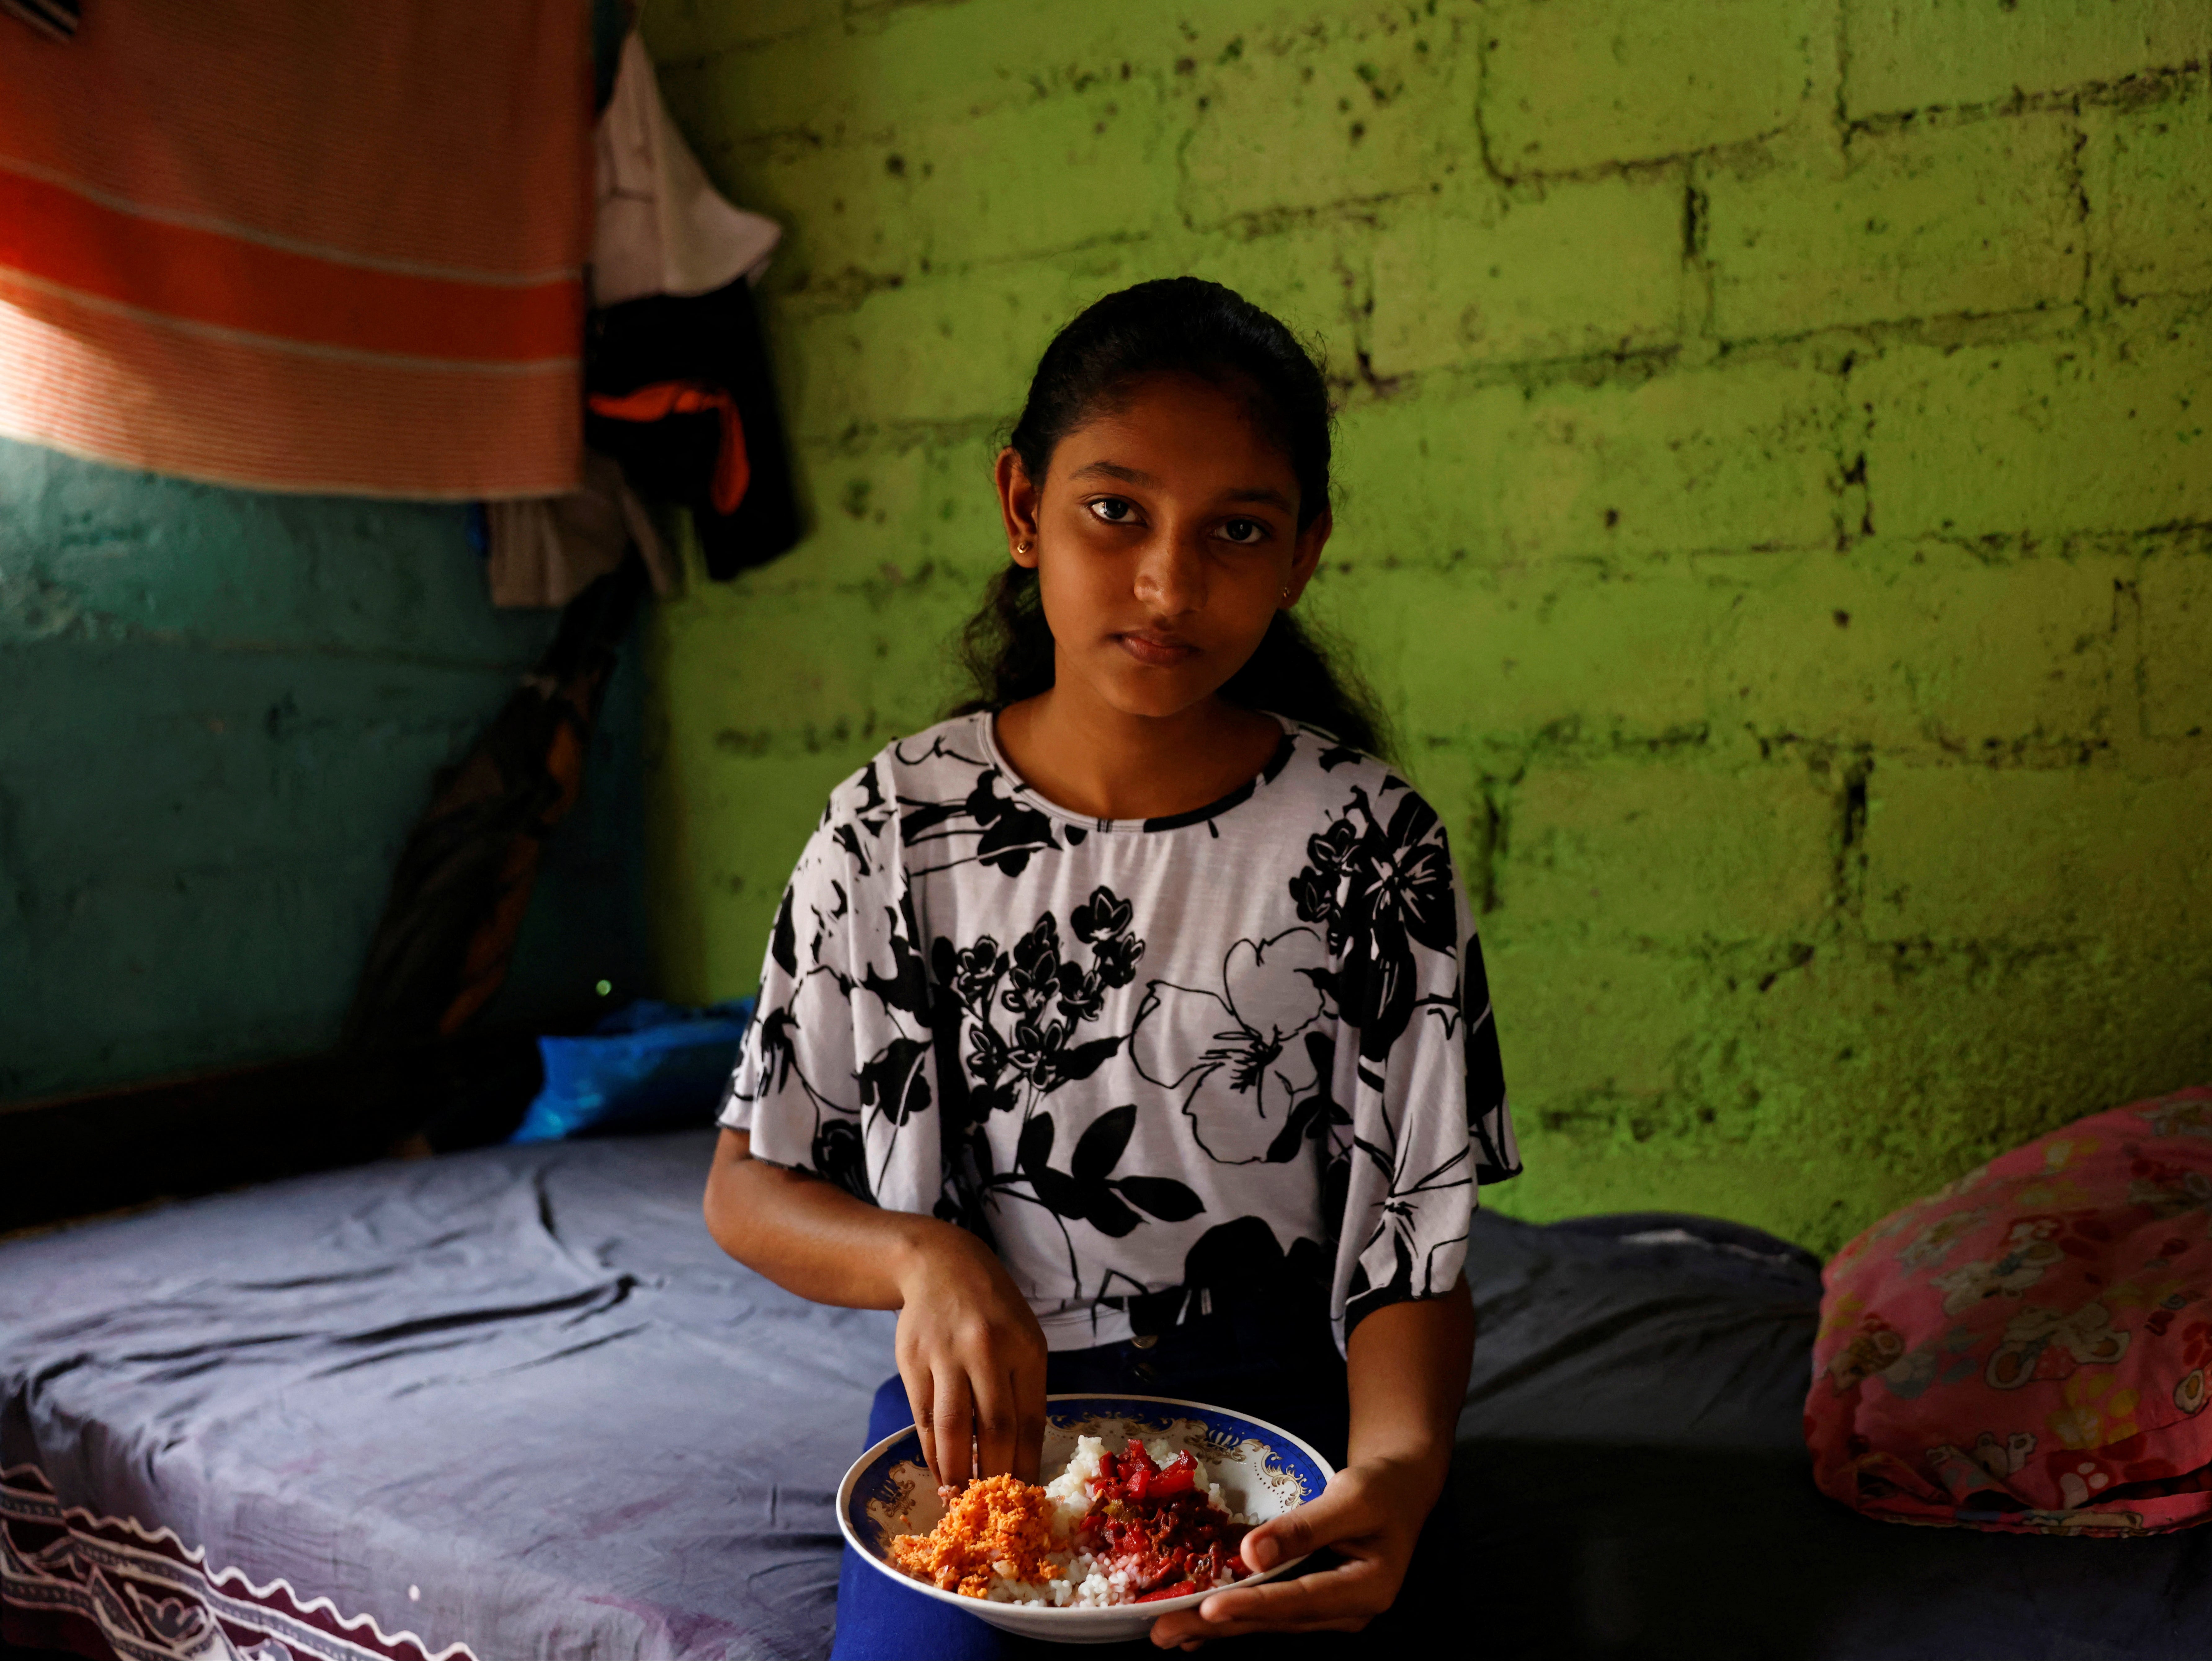 Dilhani Wathsala, 14, with her lunch. ‘Before the economic crisis, we ate well and we served meat or fish to our kids at least three or four times a week. Now fish is out of the reach of our family and so is meat,’ says her mother